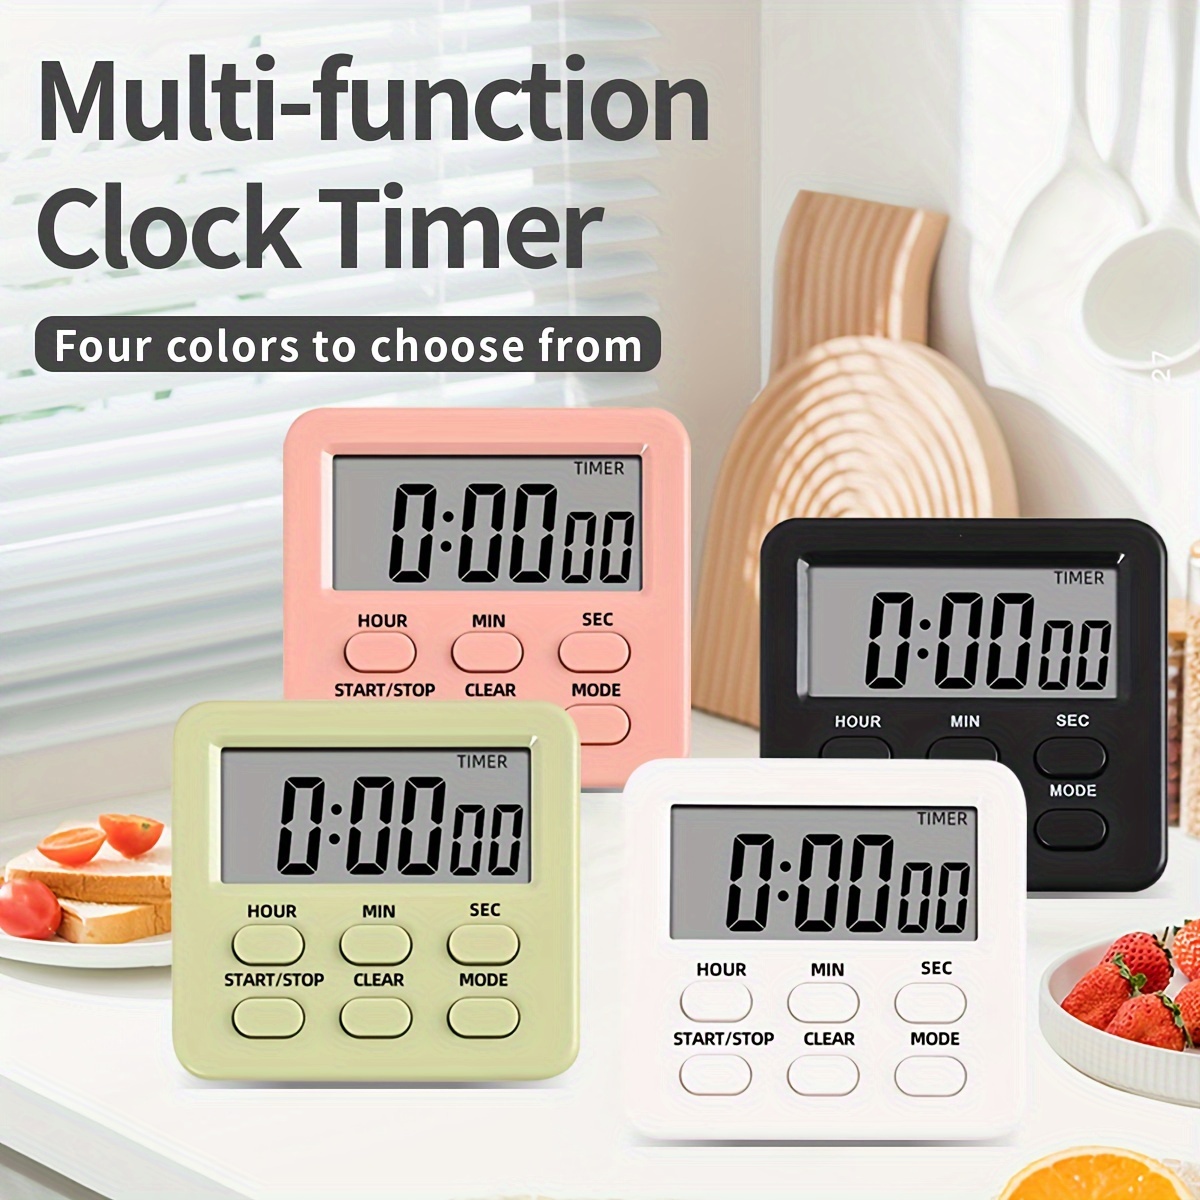 

Versatile Digital Kitchen Timer With Alarm Clock - Count Up & Down, 24-hour Display, Memory Function, Large Lcd, Magnetic/stand Options For Cooking, Baking, Study & Gym - Kt Thermo